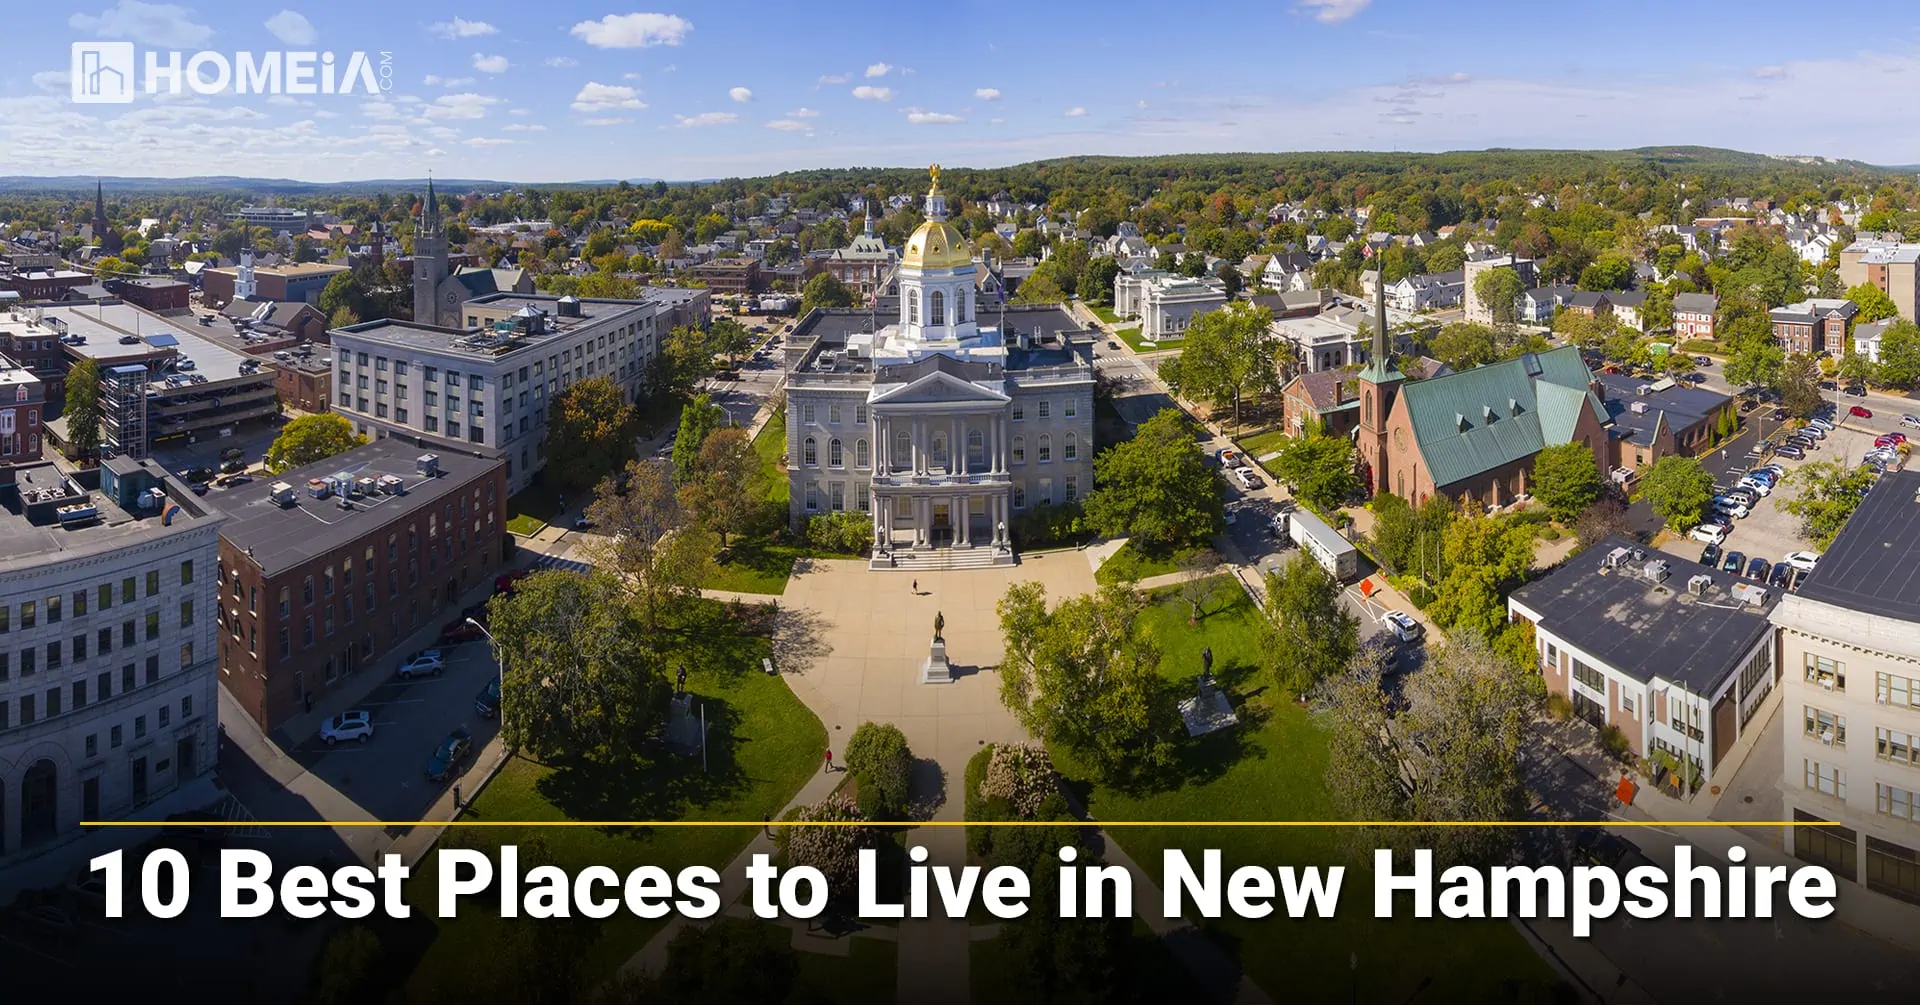 The 10 Best Places to Live in New Hampshire in 2023